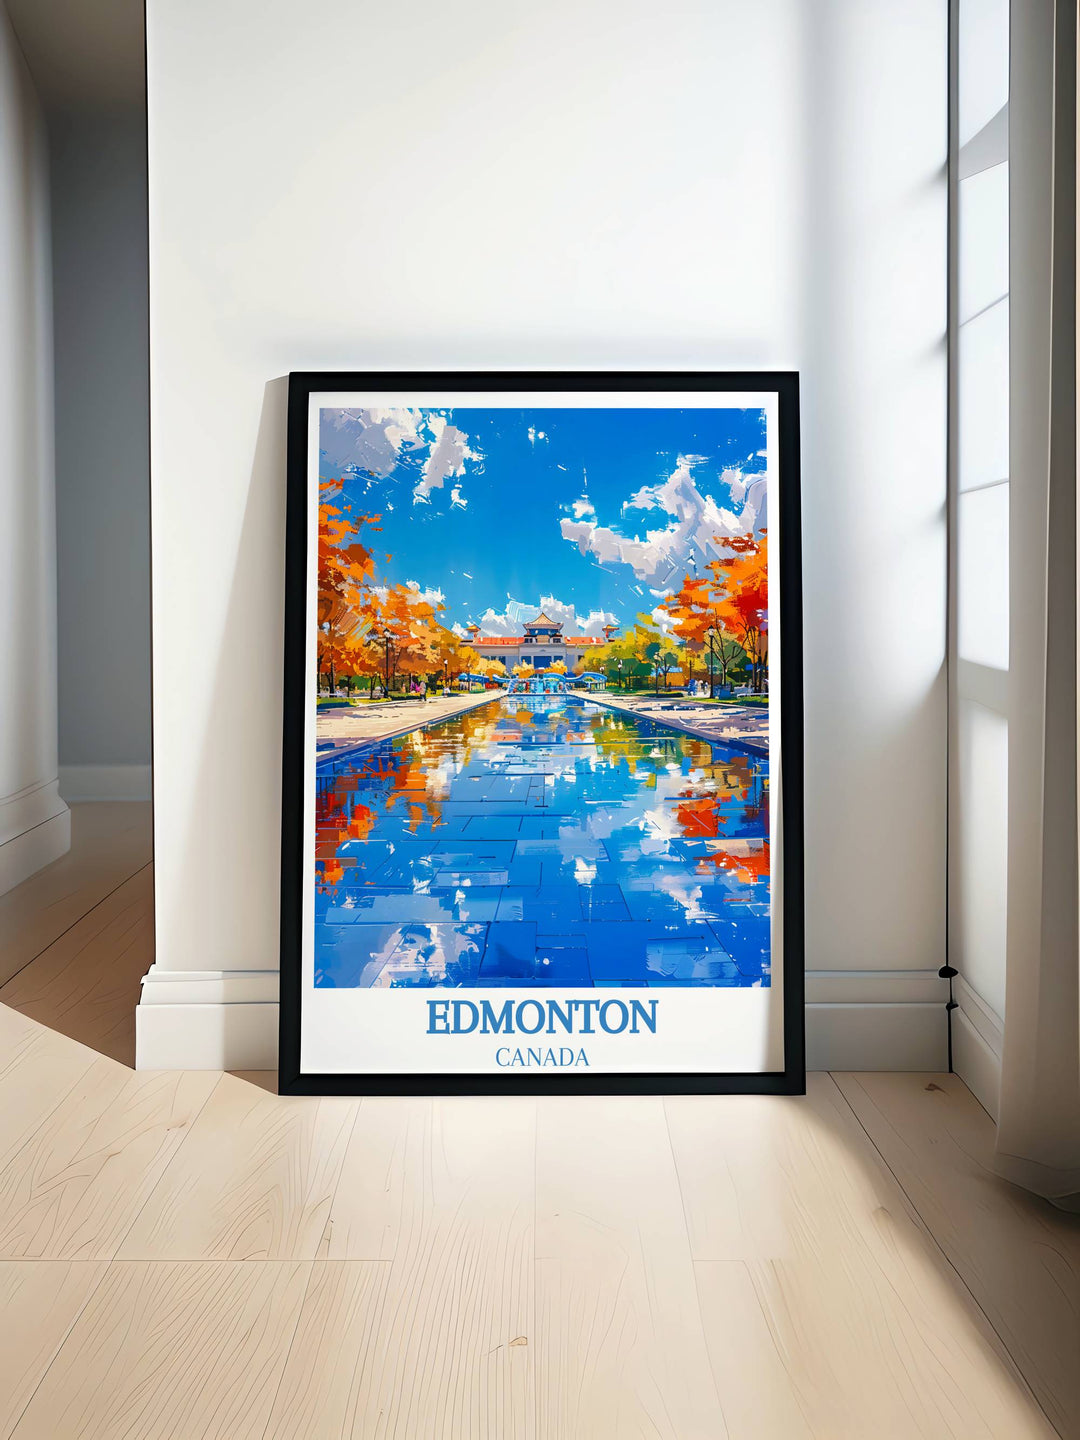 dmonton City Poster Print featuring the vibrant downtown skyline at sunset, available at MapYourDreams, perfect for adding a touch of urban elegance to any room.